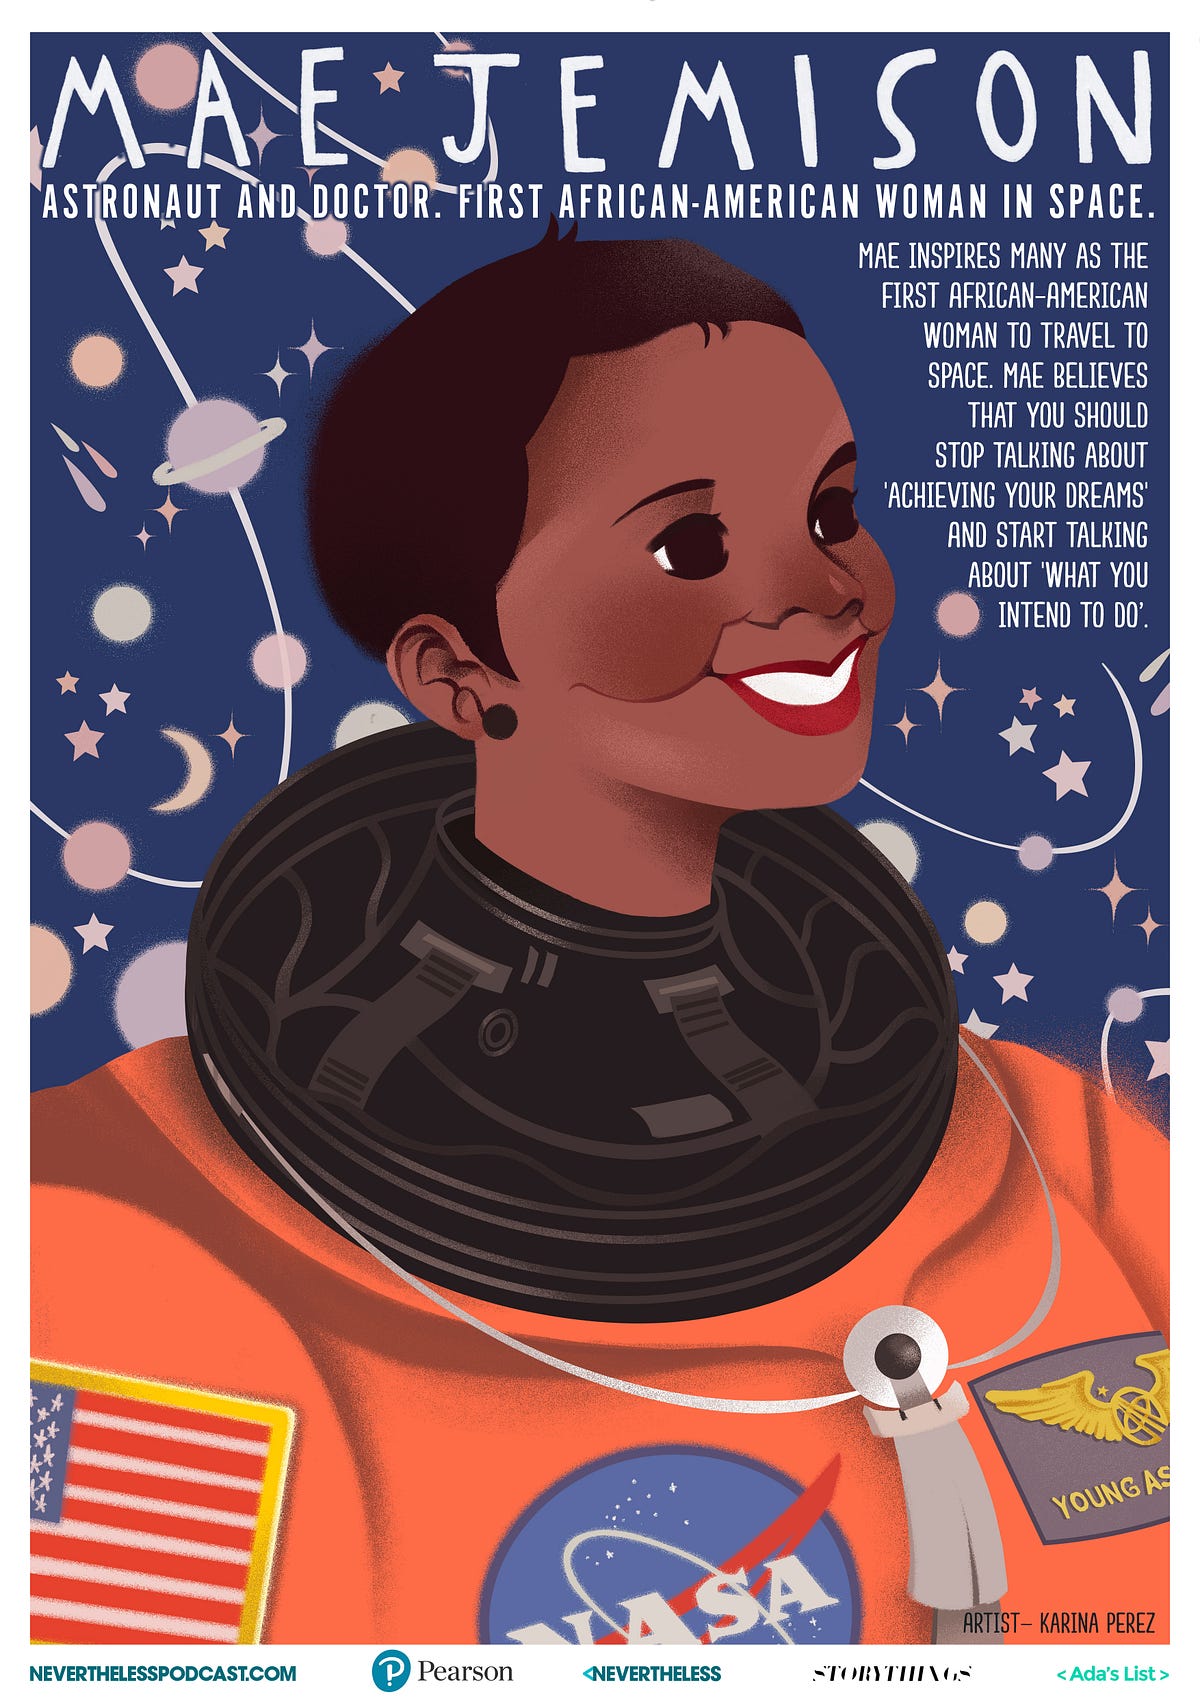 An image of Mae C. Jemison is an American engineer, physician and NASA astronaut. She became the first African American woman to travel in space when she went into orbit aboard the Space Shuttle Endeavour on September 12, 1992. She resigned from NASA in 1993 to found a company researching the application of technology to daily life. She has appeared on television several times, including as an actress in an episode of Star Trek: The Next Generation. She is a dancer and holds nine honorary doctorates in science, engineering, letters, and the humanities. She is the current principal of the 100 Year Starship organization